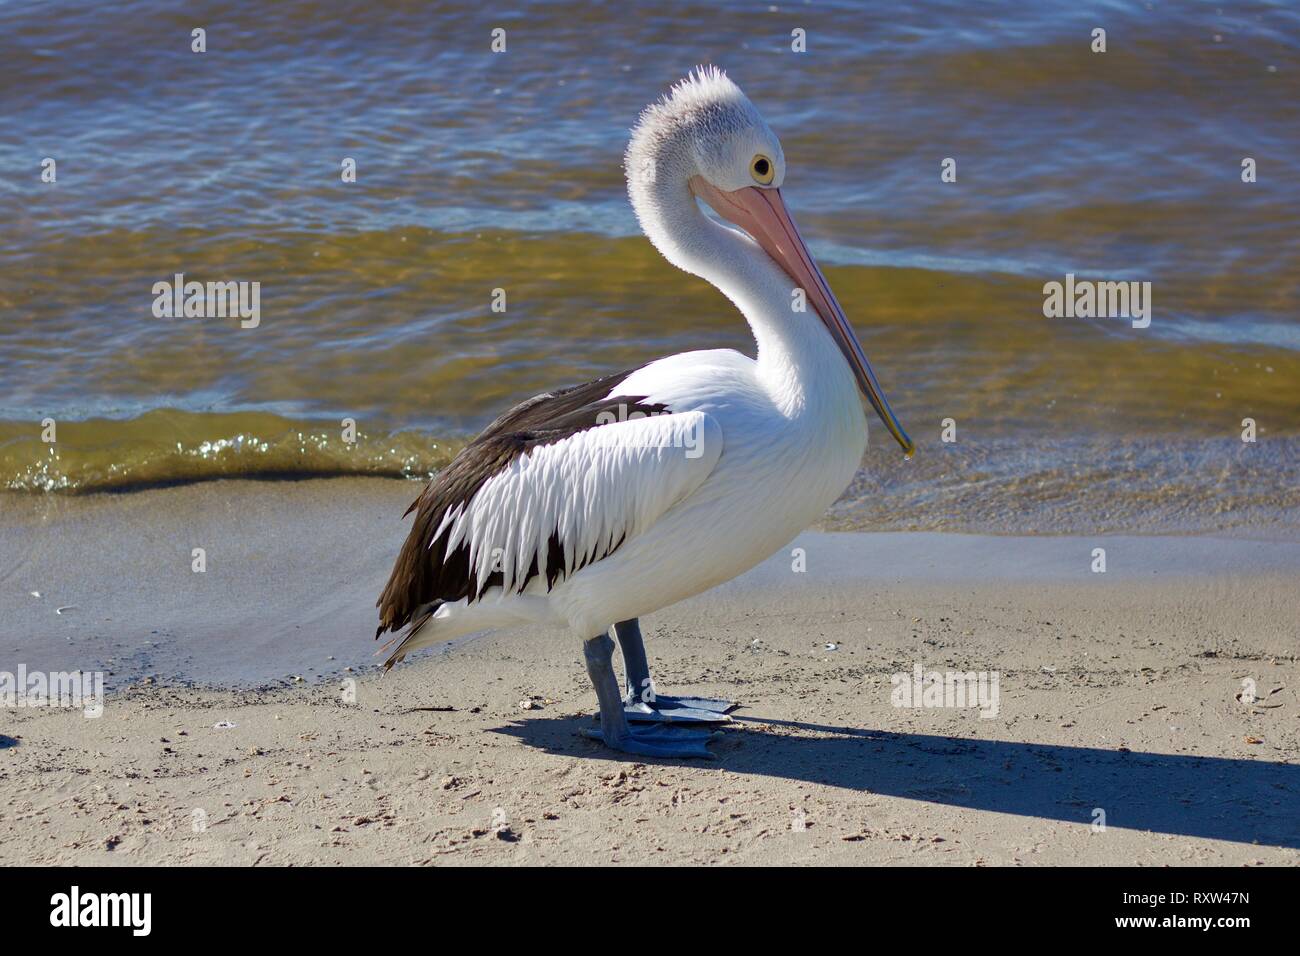 Isolated single Australian Pelican standing alone on sandy beach with water lapping onto shore behind Stock Photo